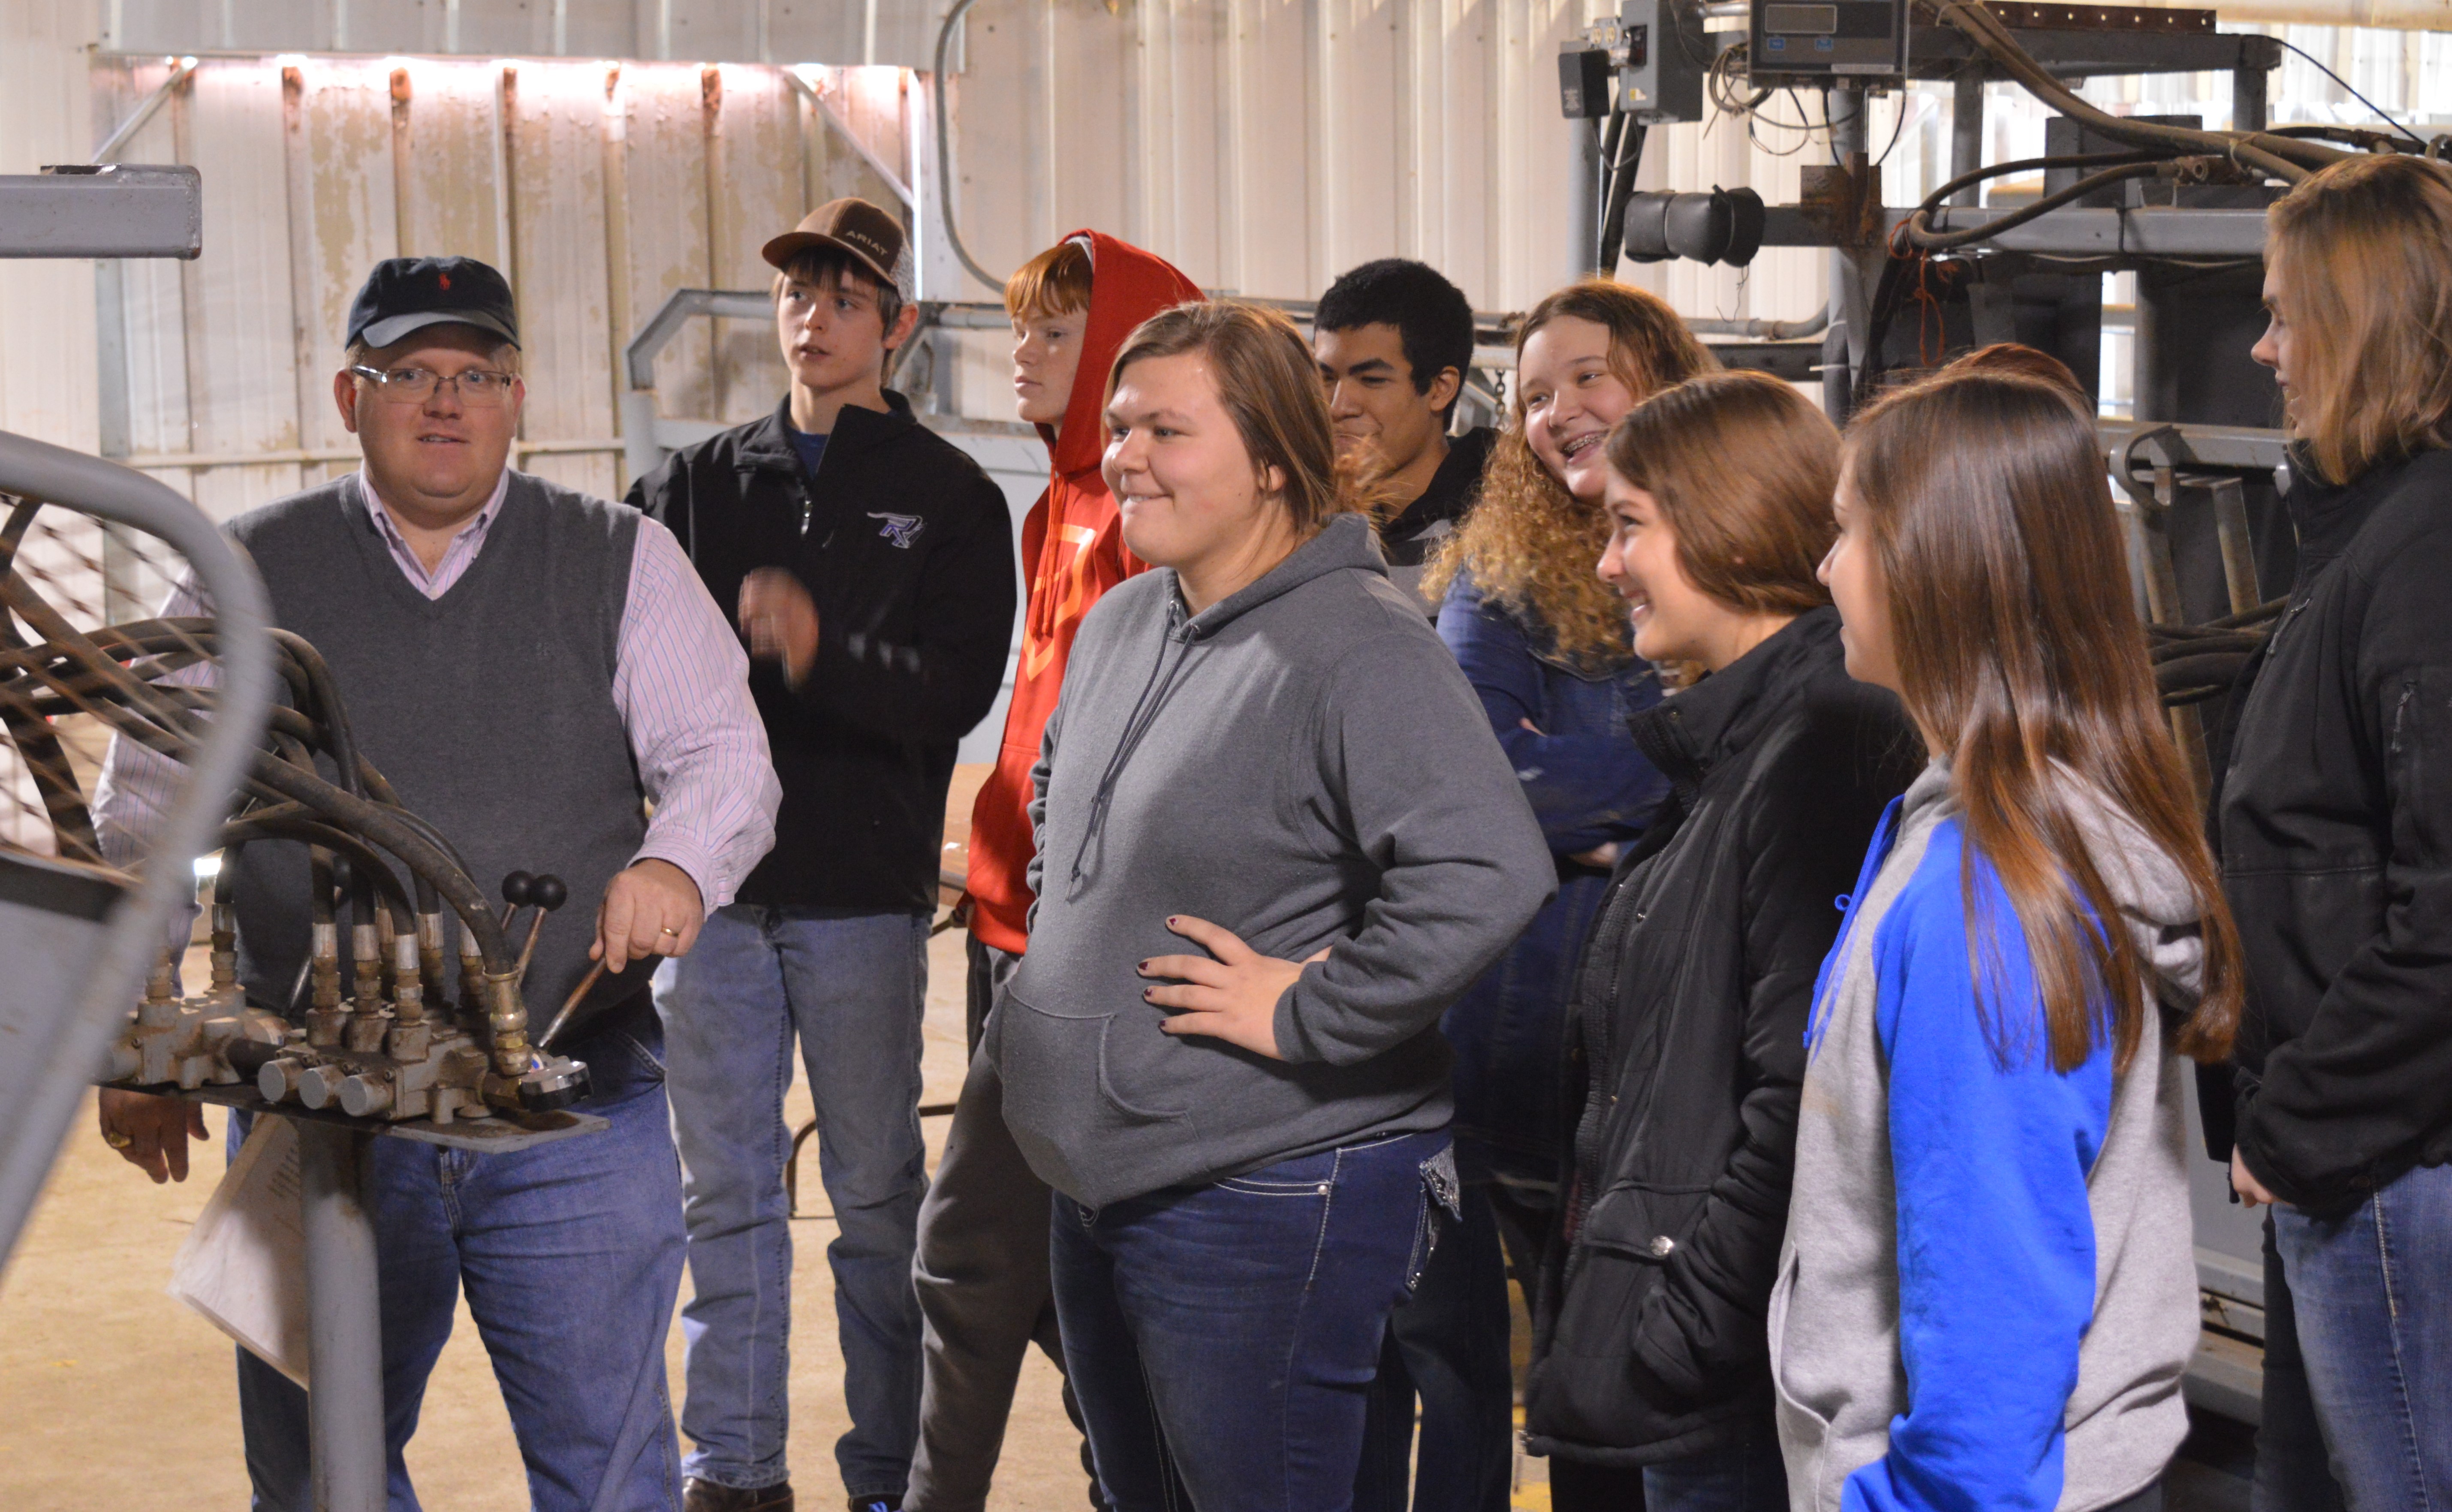 North Platte students observe Dr. Doug Smith demonstrate equipment for processing cattle during health checkups at the NCTA Red Barn. Students visited campus last year to see animal science in action. (NCTA photo)